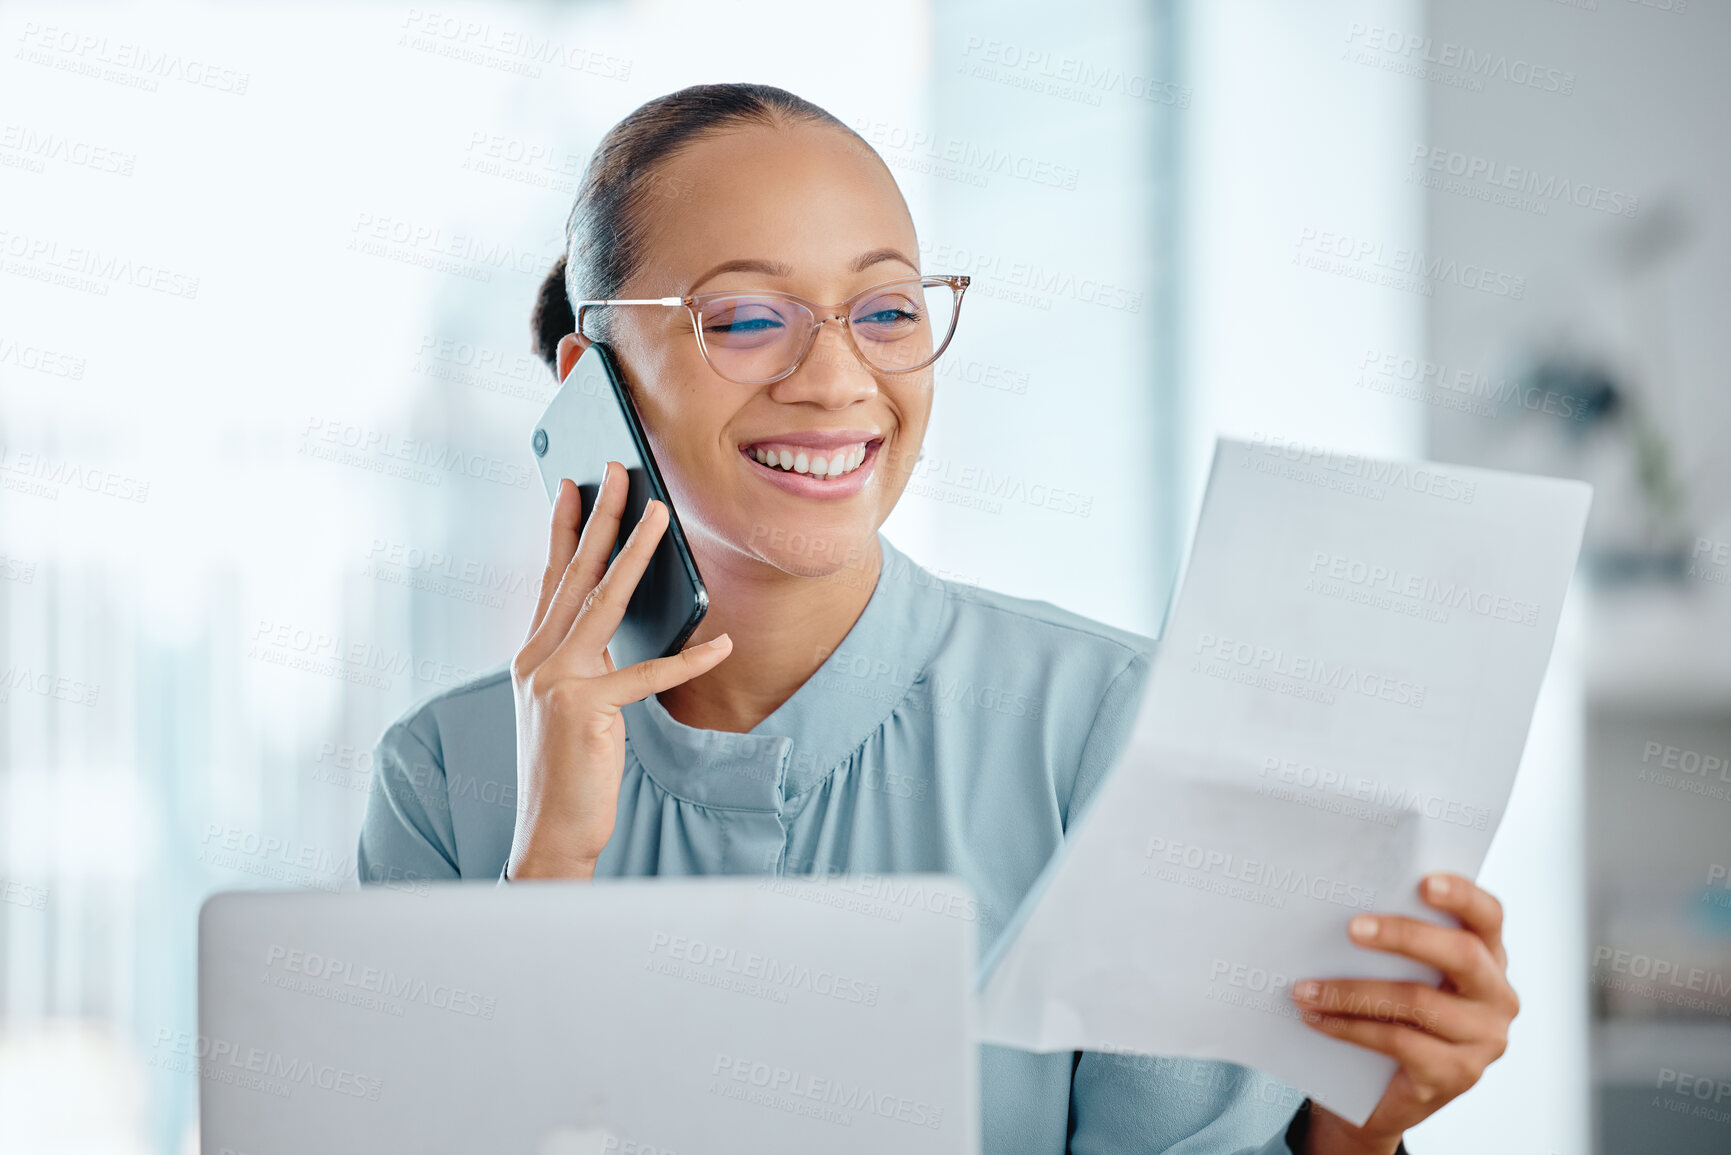 Buy stock photo Happy business woman talking on a phone call, discussing contract with a client or colleague. Female executive holding and reading documents or paperwork, sitting in front of a laptop at office desk.